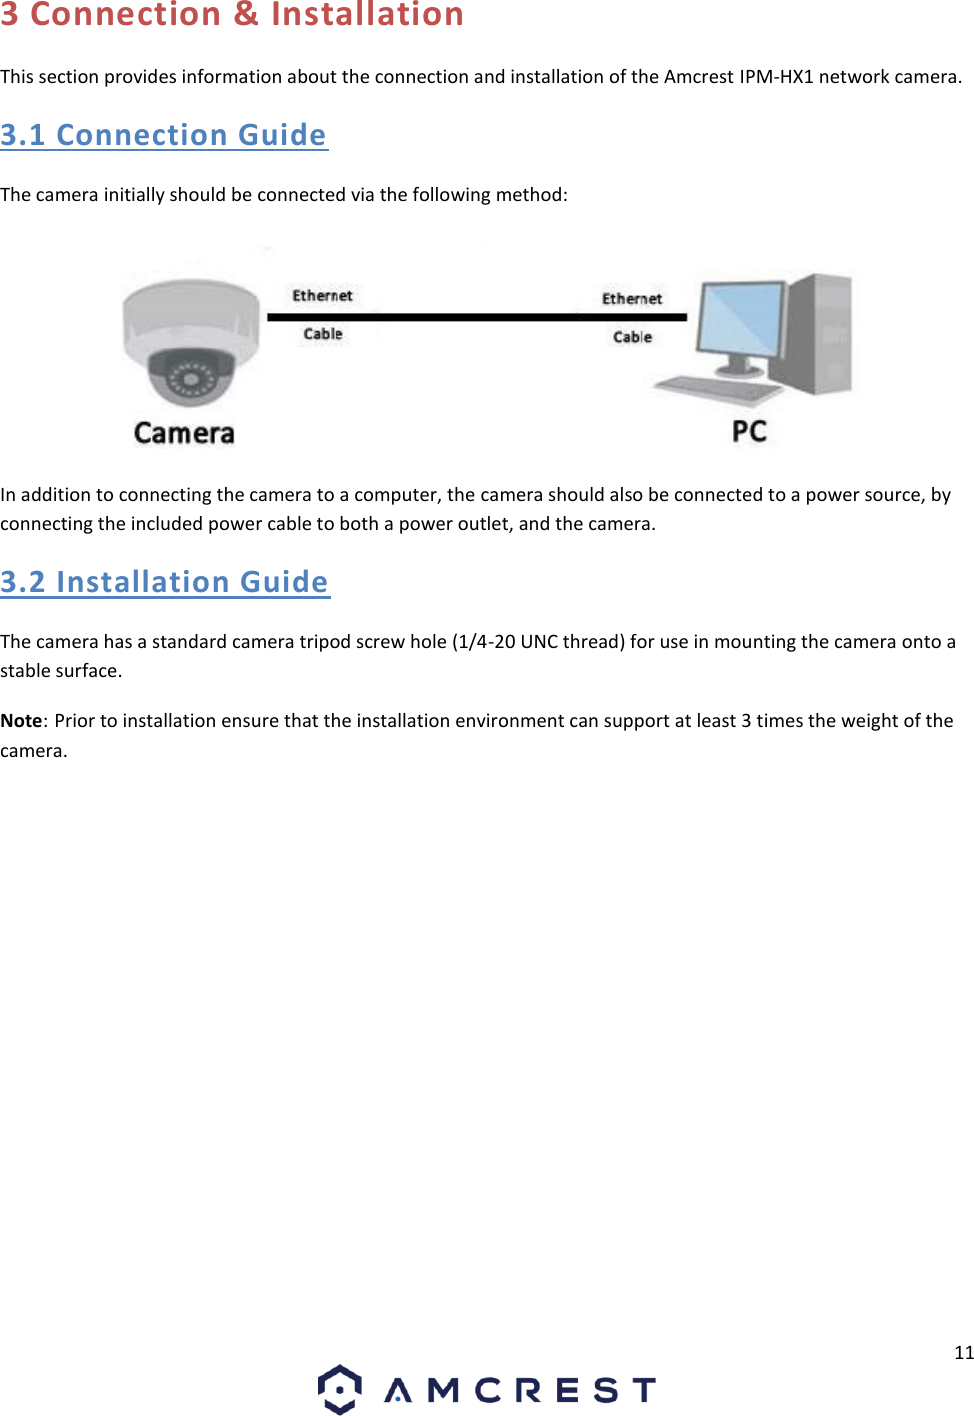 11 3 Connection &amp; Installation This section provides information about the connection and installation of the Amcrest IPM-HX1 network camera. 3.1 Connection Guide The camera initially should be connected via the following method: In addition to connecting the camera to a computer, the camera should also be connected to a power source, by connecting the included power cable to both a power outlet, and the camera. 3.2 Installation Guide The camera has a standard camera tripod screw hole (1/4-20 UNC thread) for use in mounting the camera onto a stable surface.  Note: Prior to installation ensure that the installation environment can support at least 3 times the weight of the camera. 